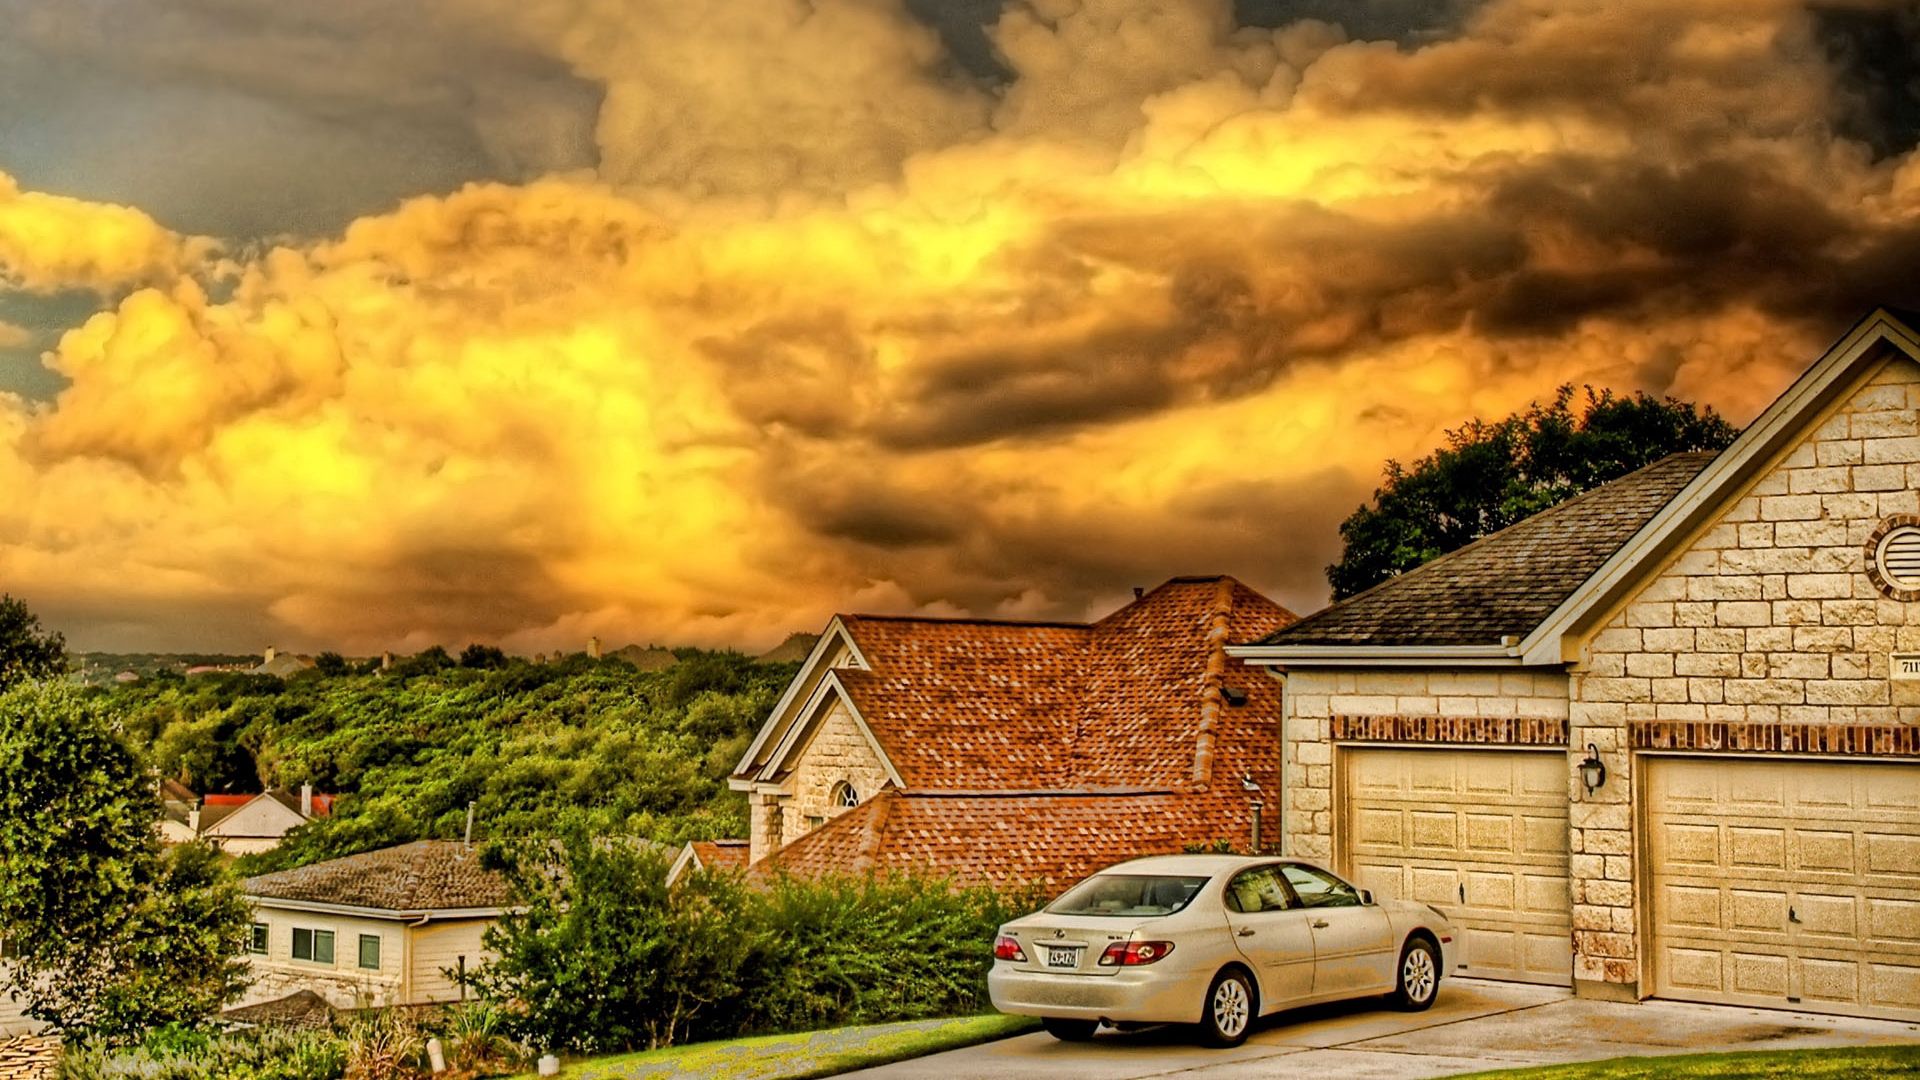 cities, building, car, hdr, garage